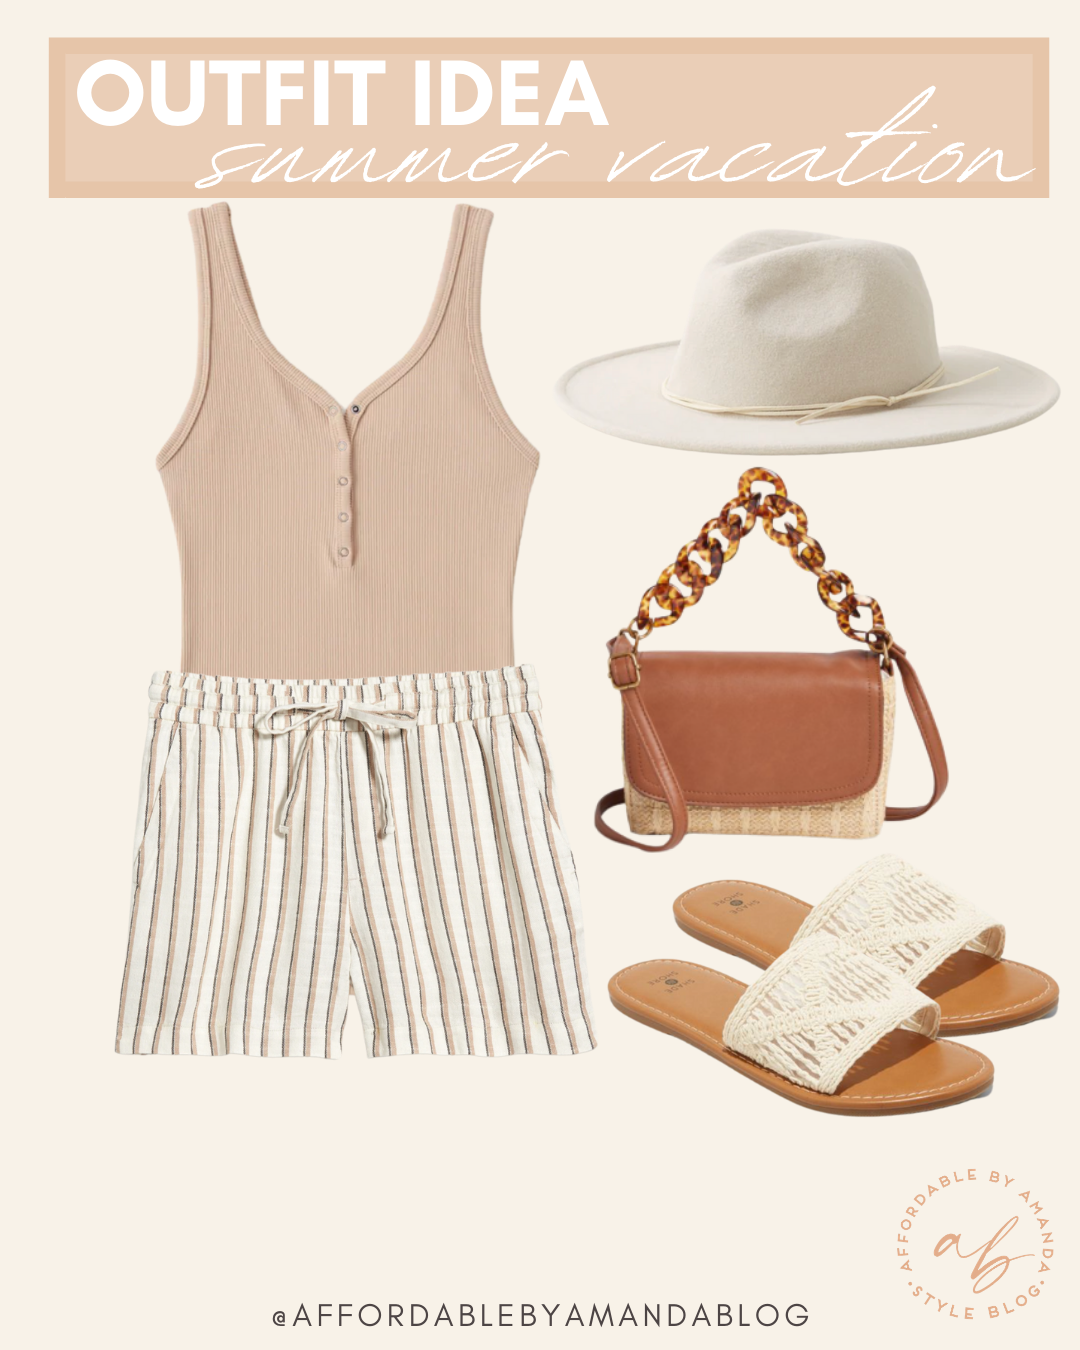 21 Summer Vacation Outfits 2021 - Affordable by Amanda